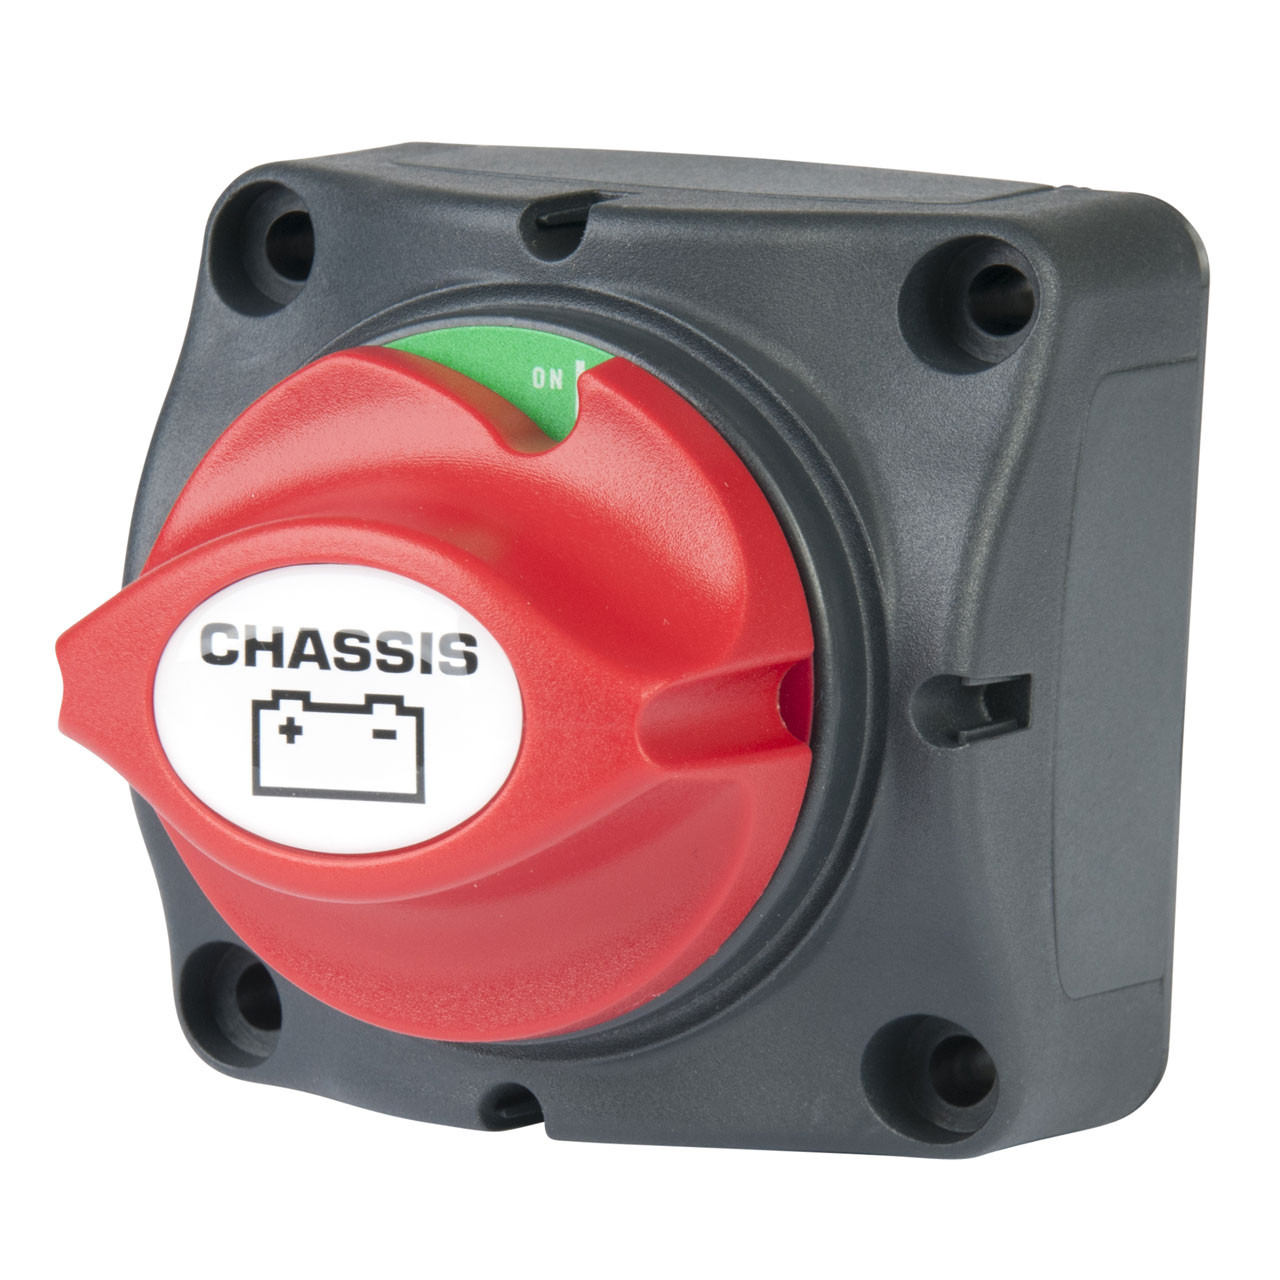 Battery Master Switch. Мастер Switch. Contour Battery Switch bep Marine. Master Switch Denio.